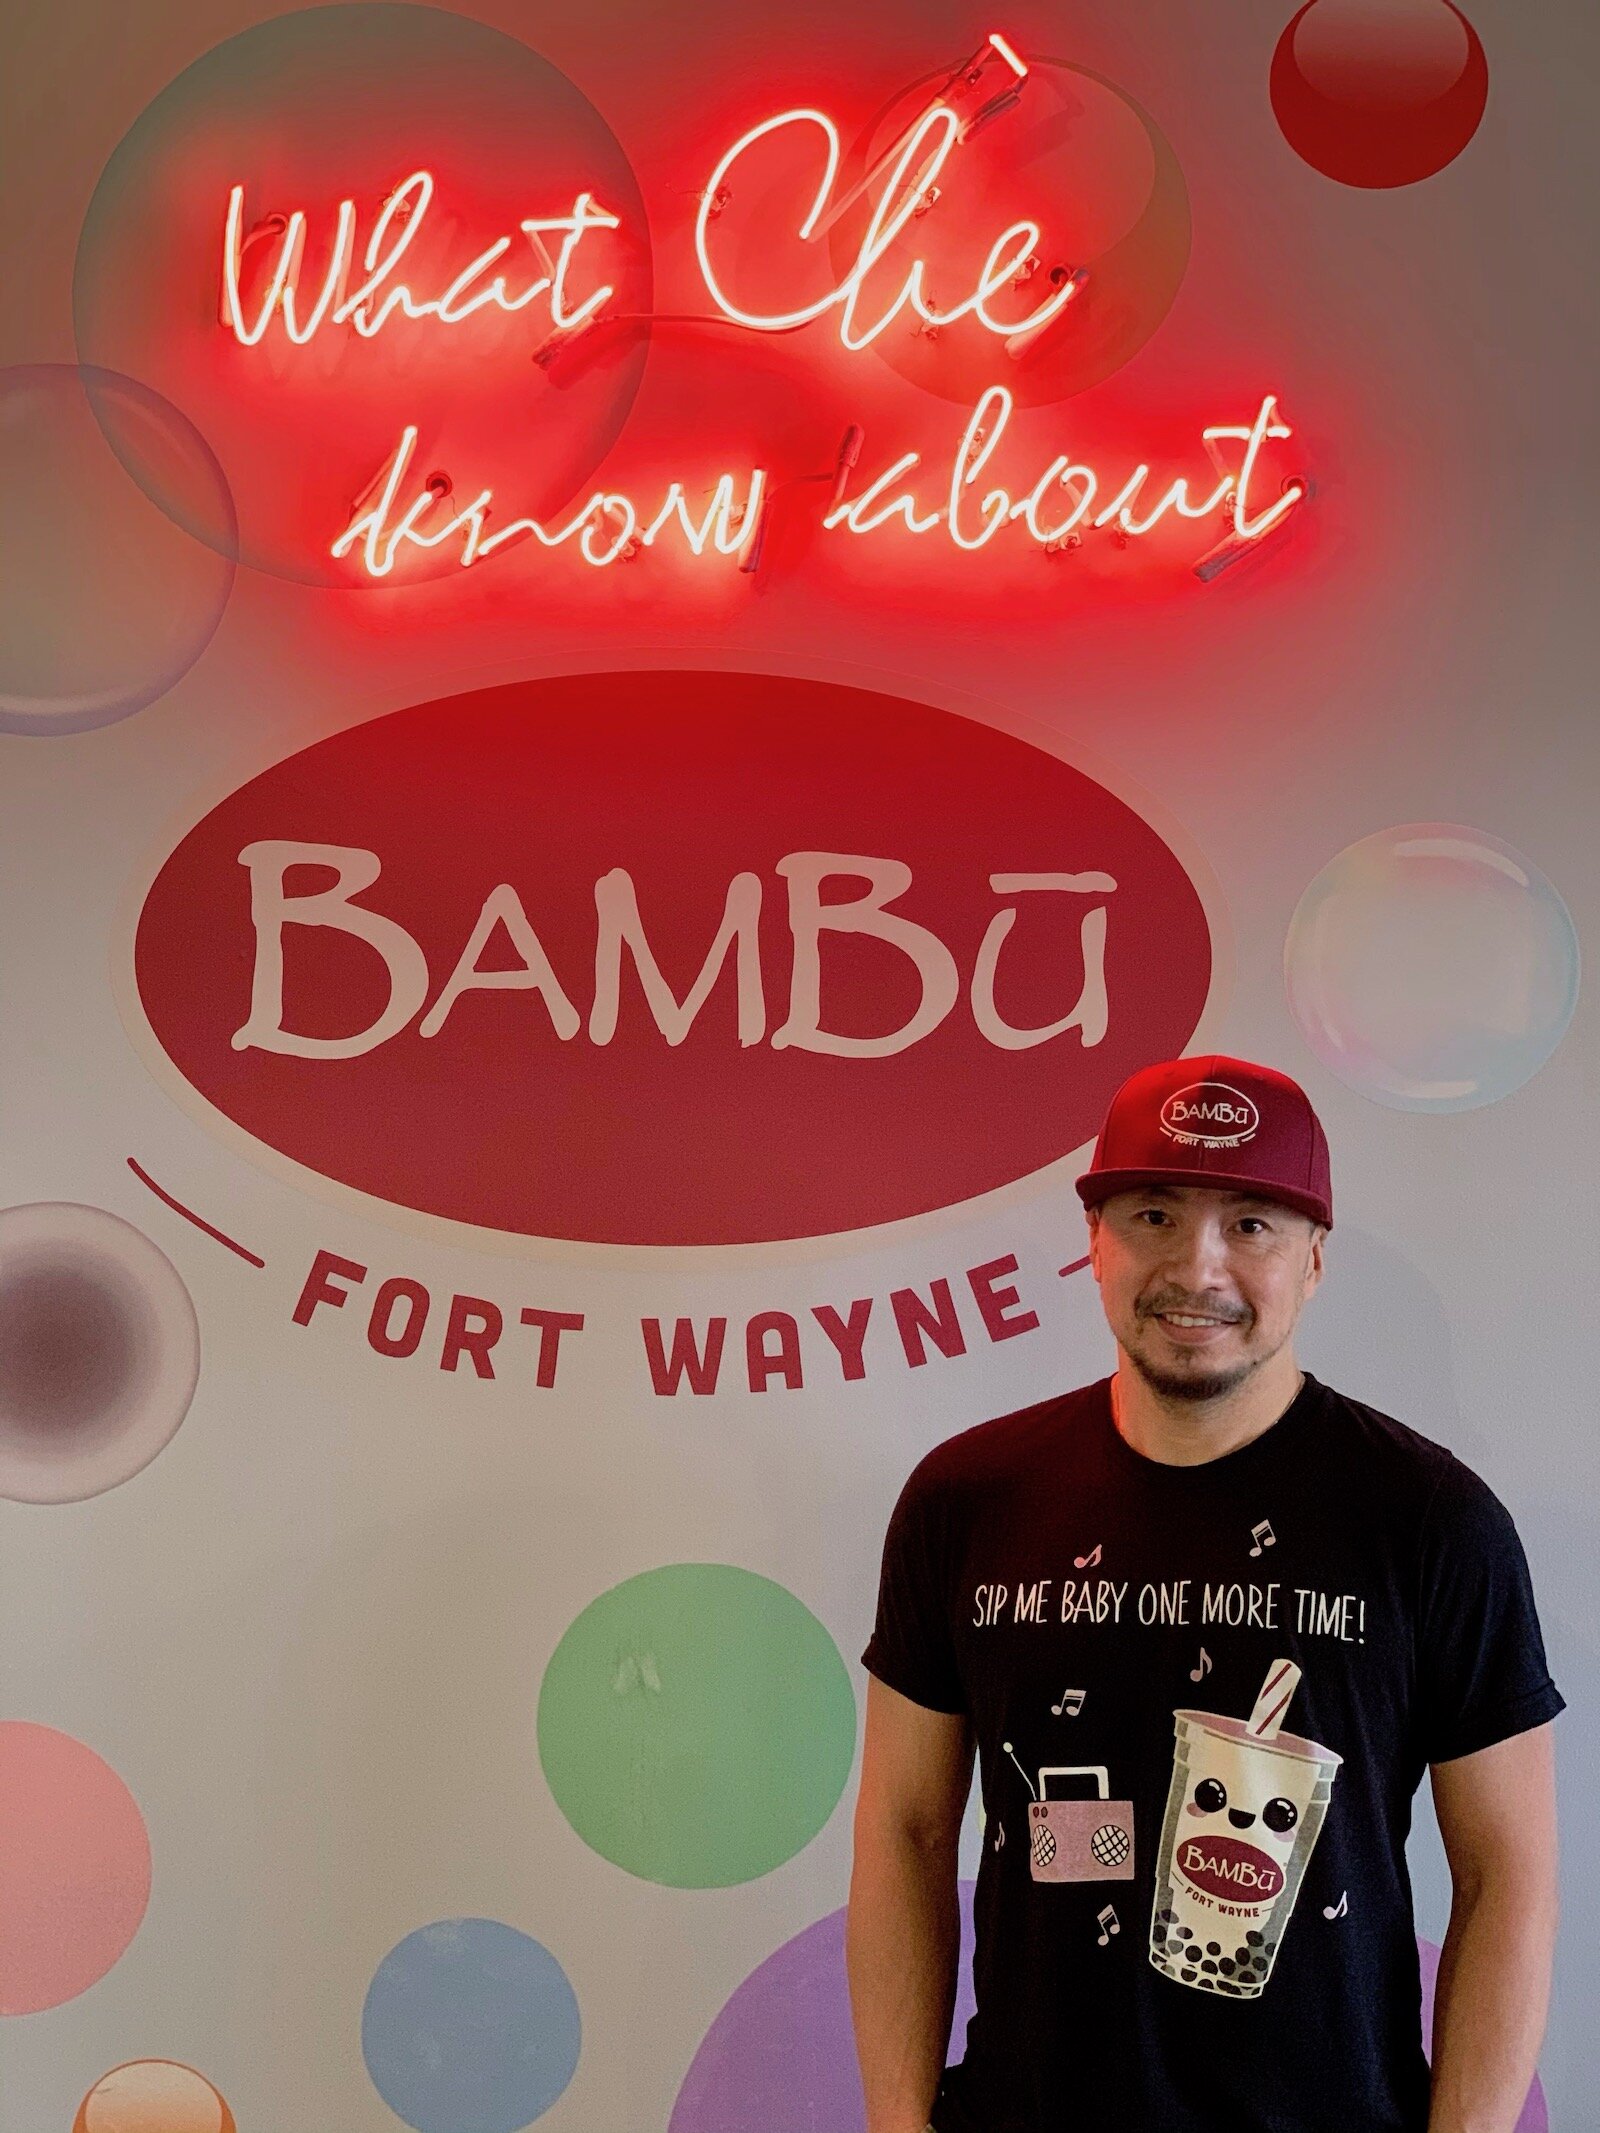 Fort Wayne native Son Ngo brought the franchise Bambu to his hometown from his former residence in San Jose, Calif.